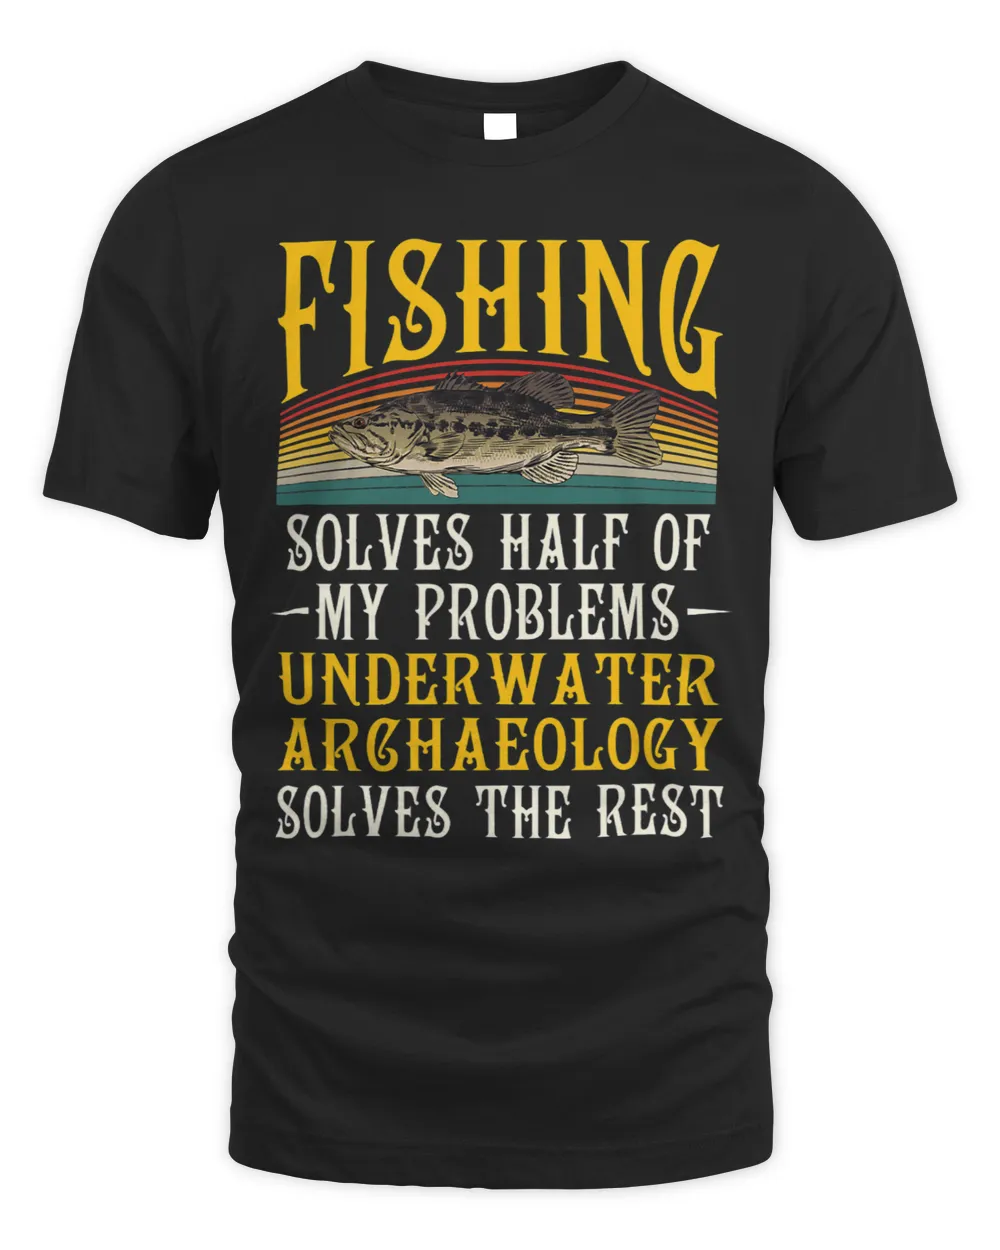 Underwater Archaeology Solves the Rest of My Problems